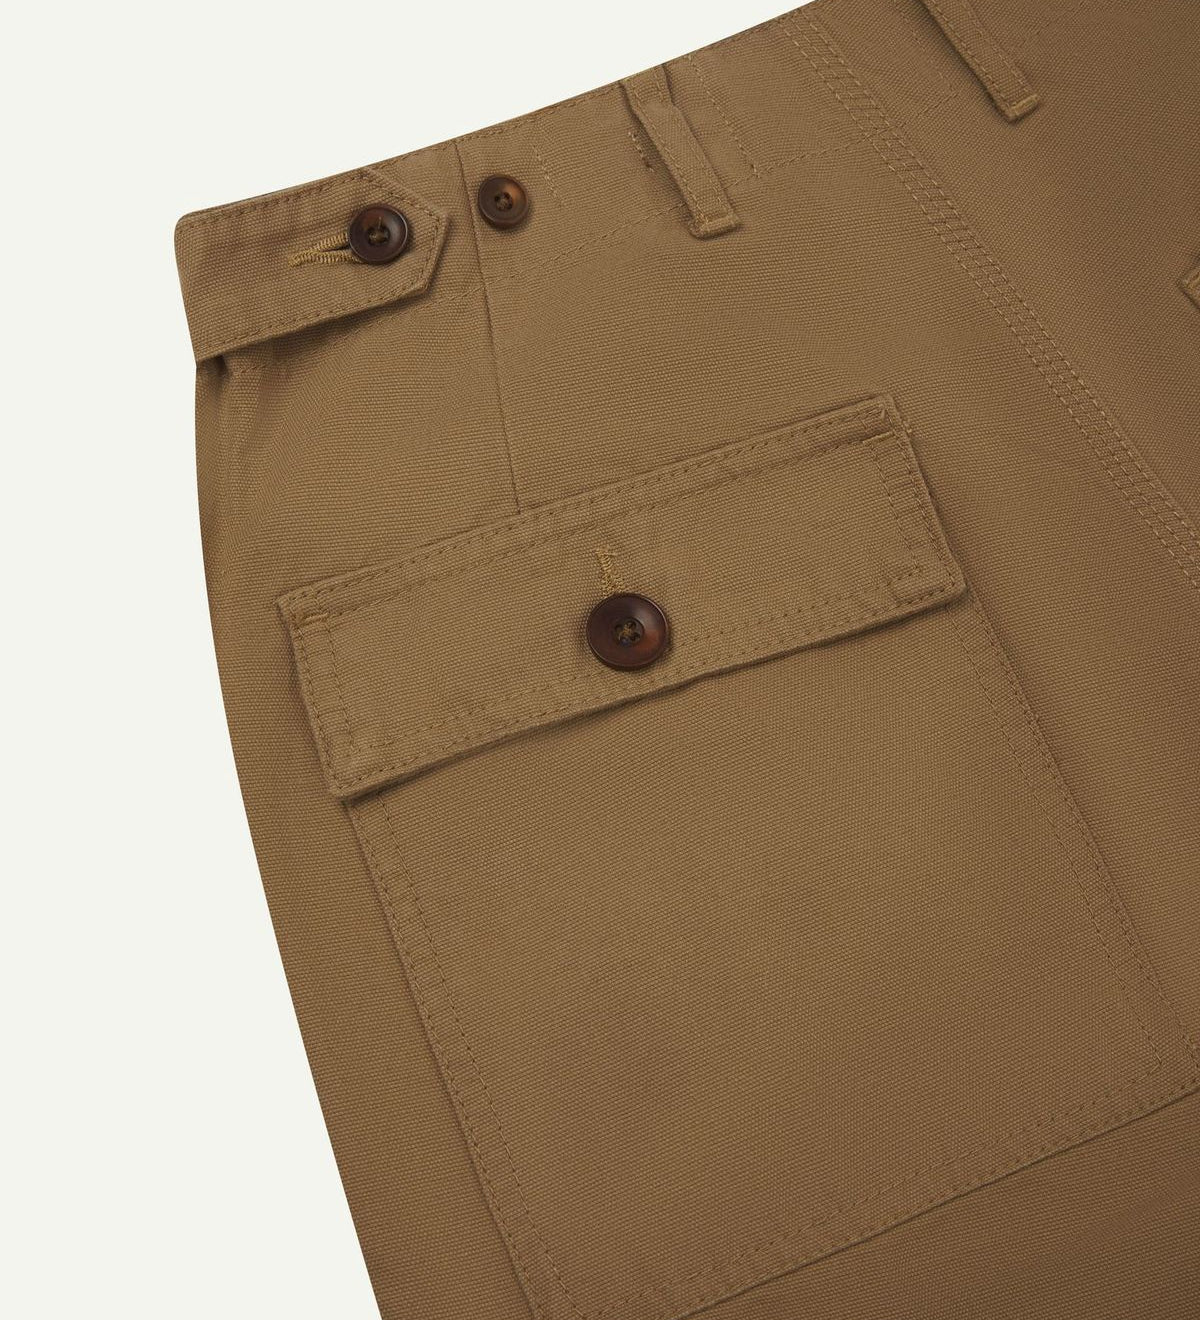 Back detail shot of Uskees organic cotton khaki casual trousers for men. showing waist band adjuster buttons and back pocket.